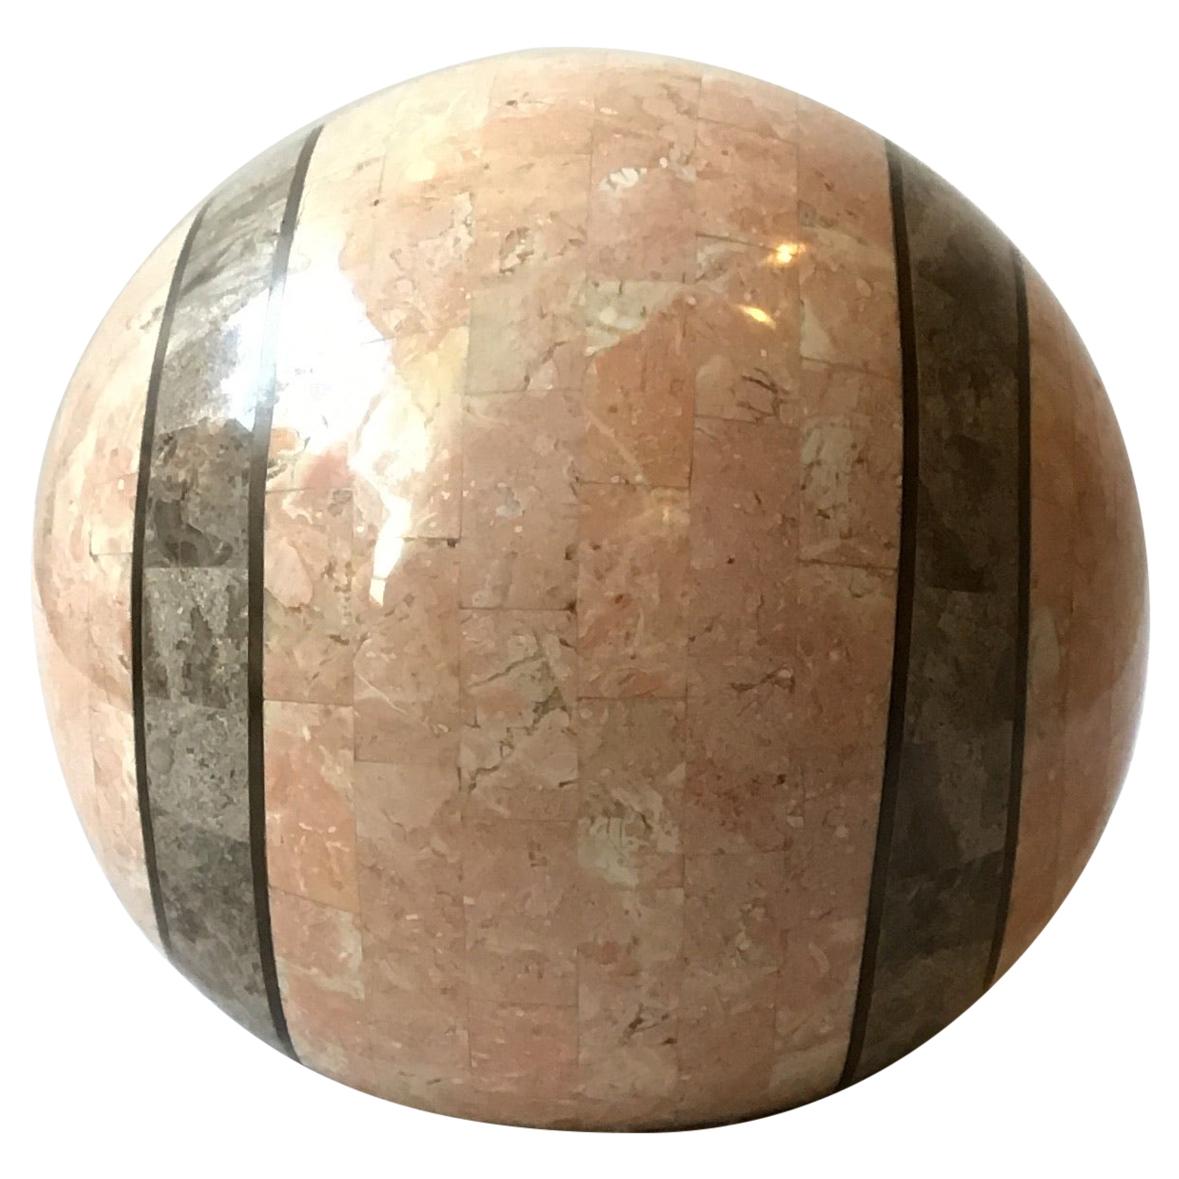 1980s Tessellated Stone Sphere